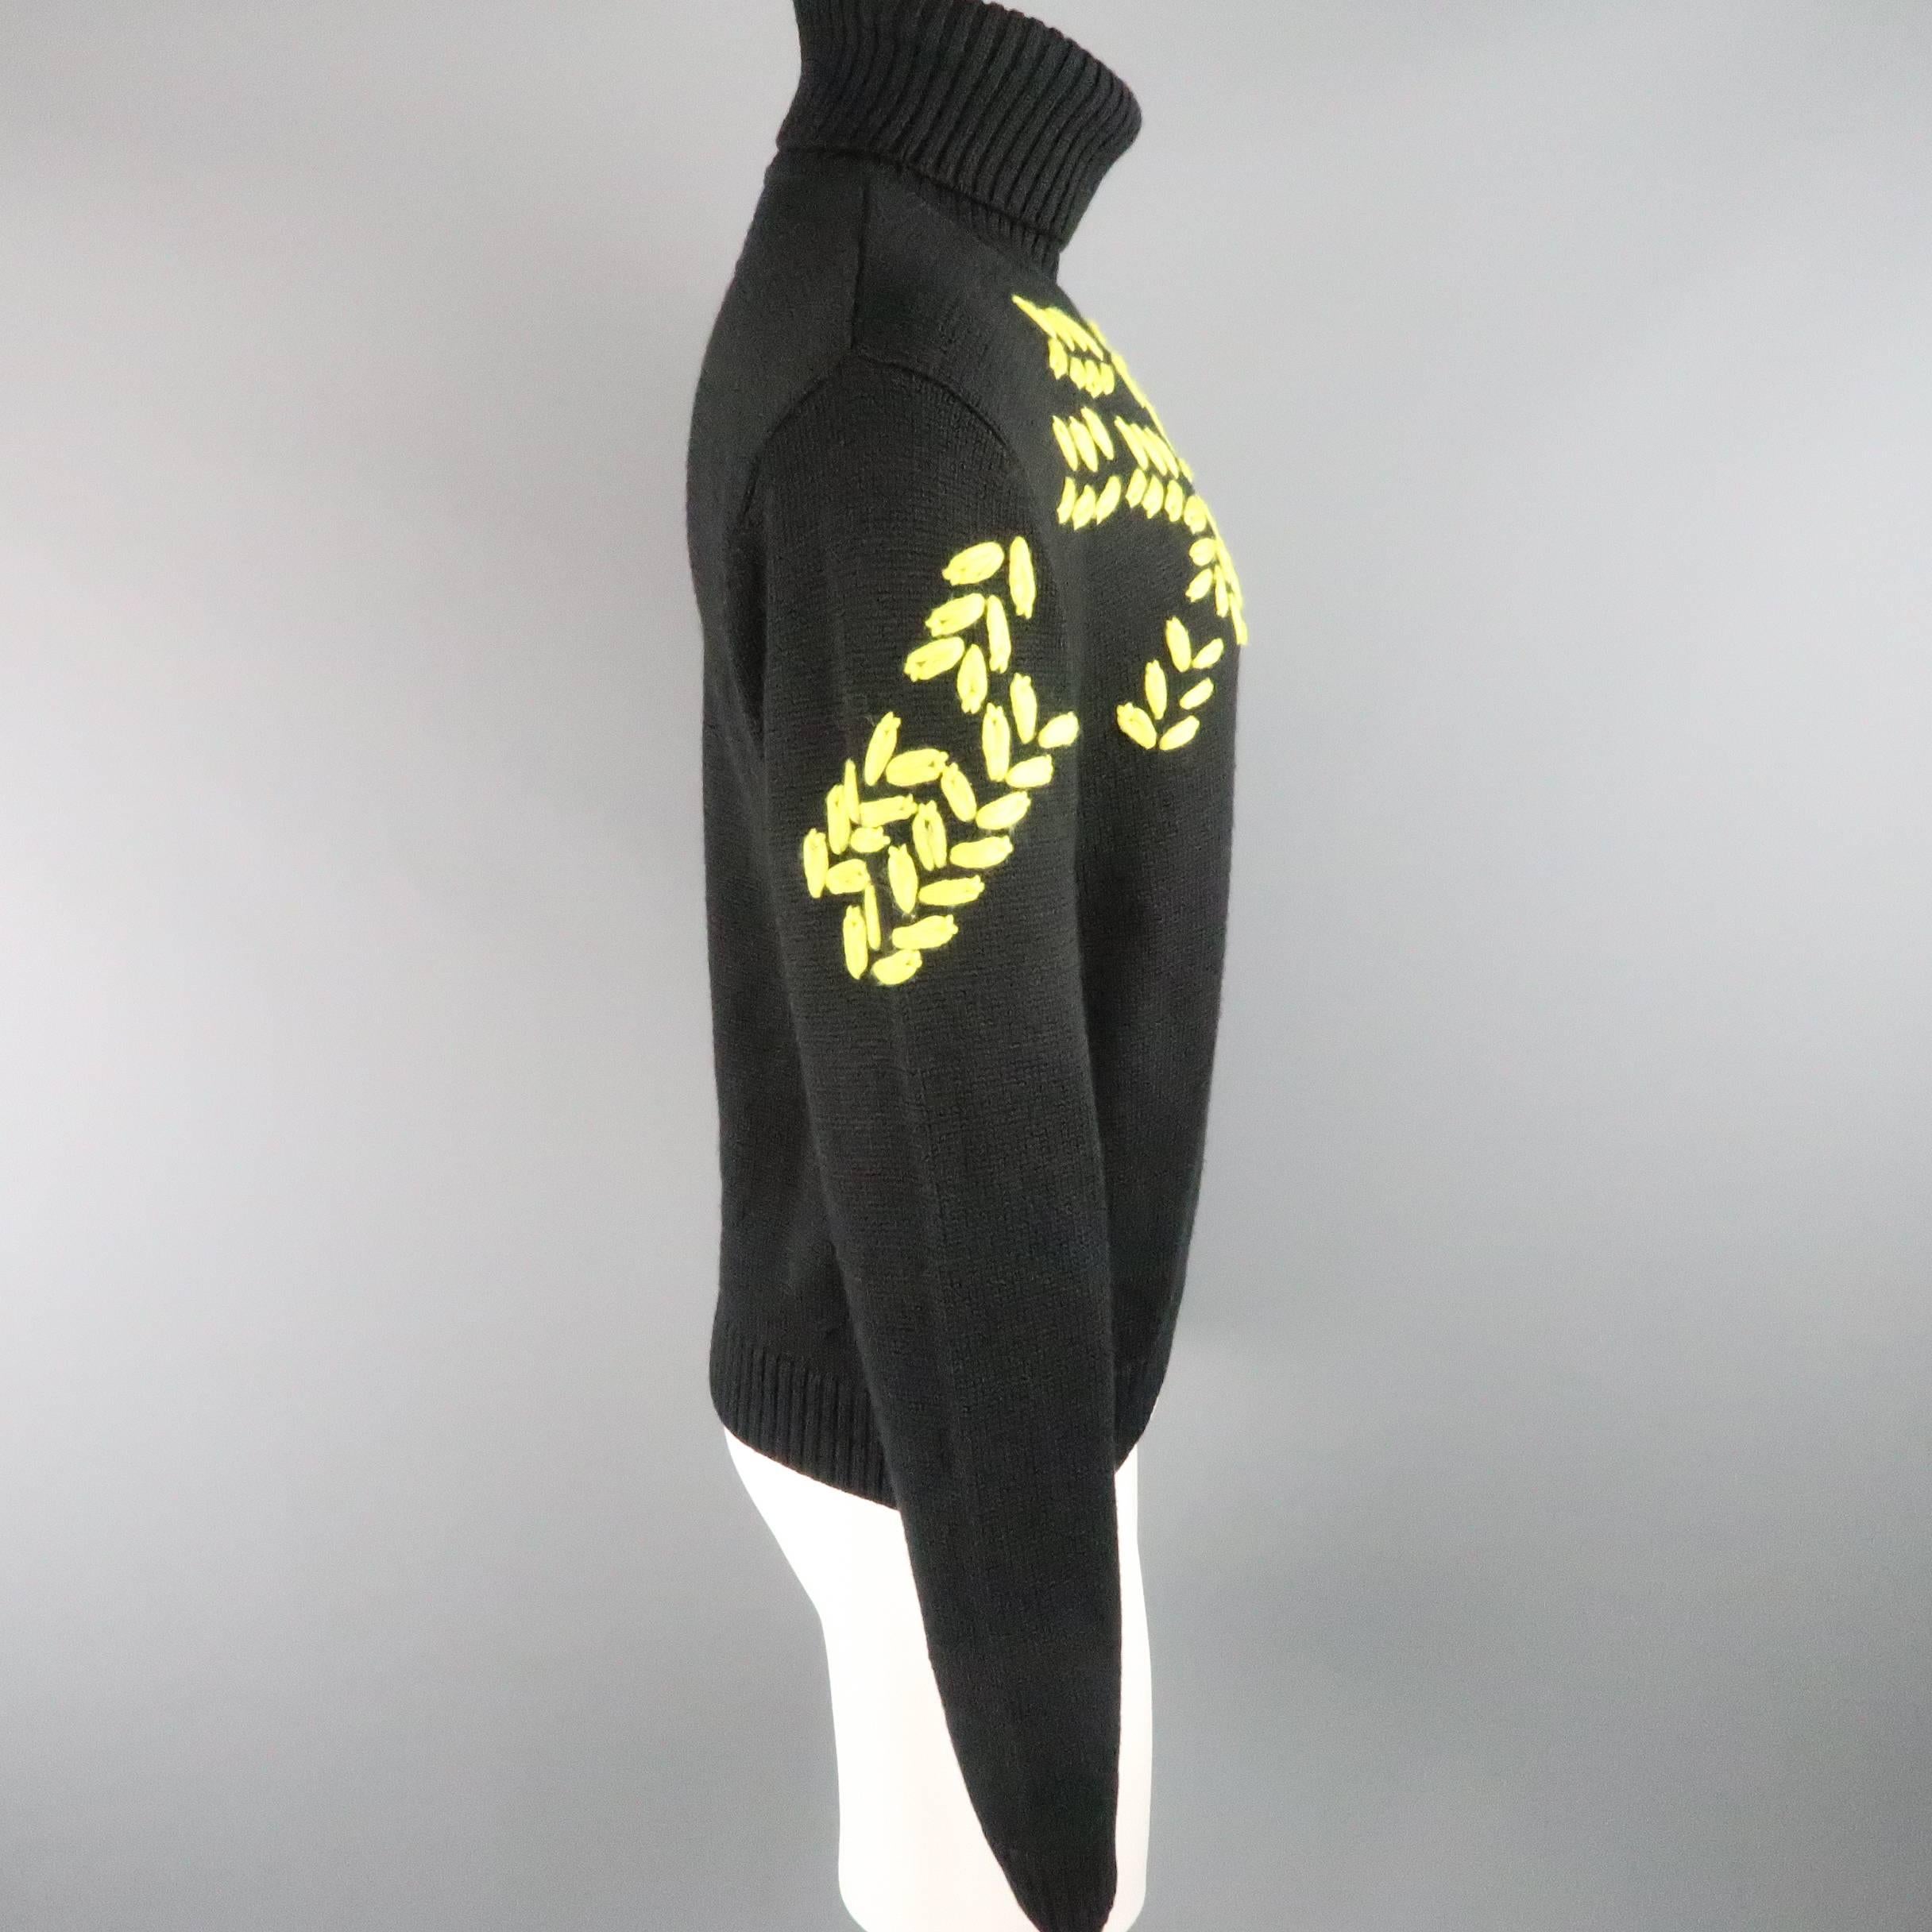 EMPORIO ARMANI EA7 S Black & Yellow Embroidered Wool Blend Turtleneck Sweater 2